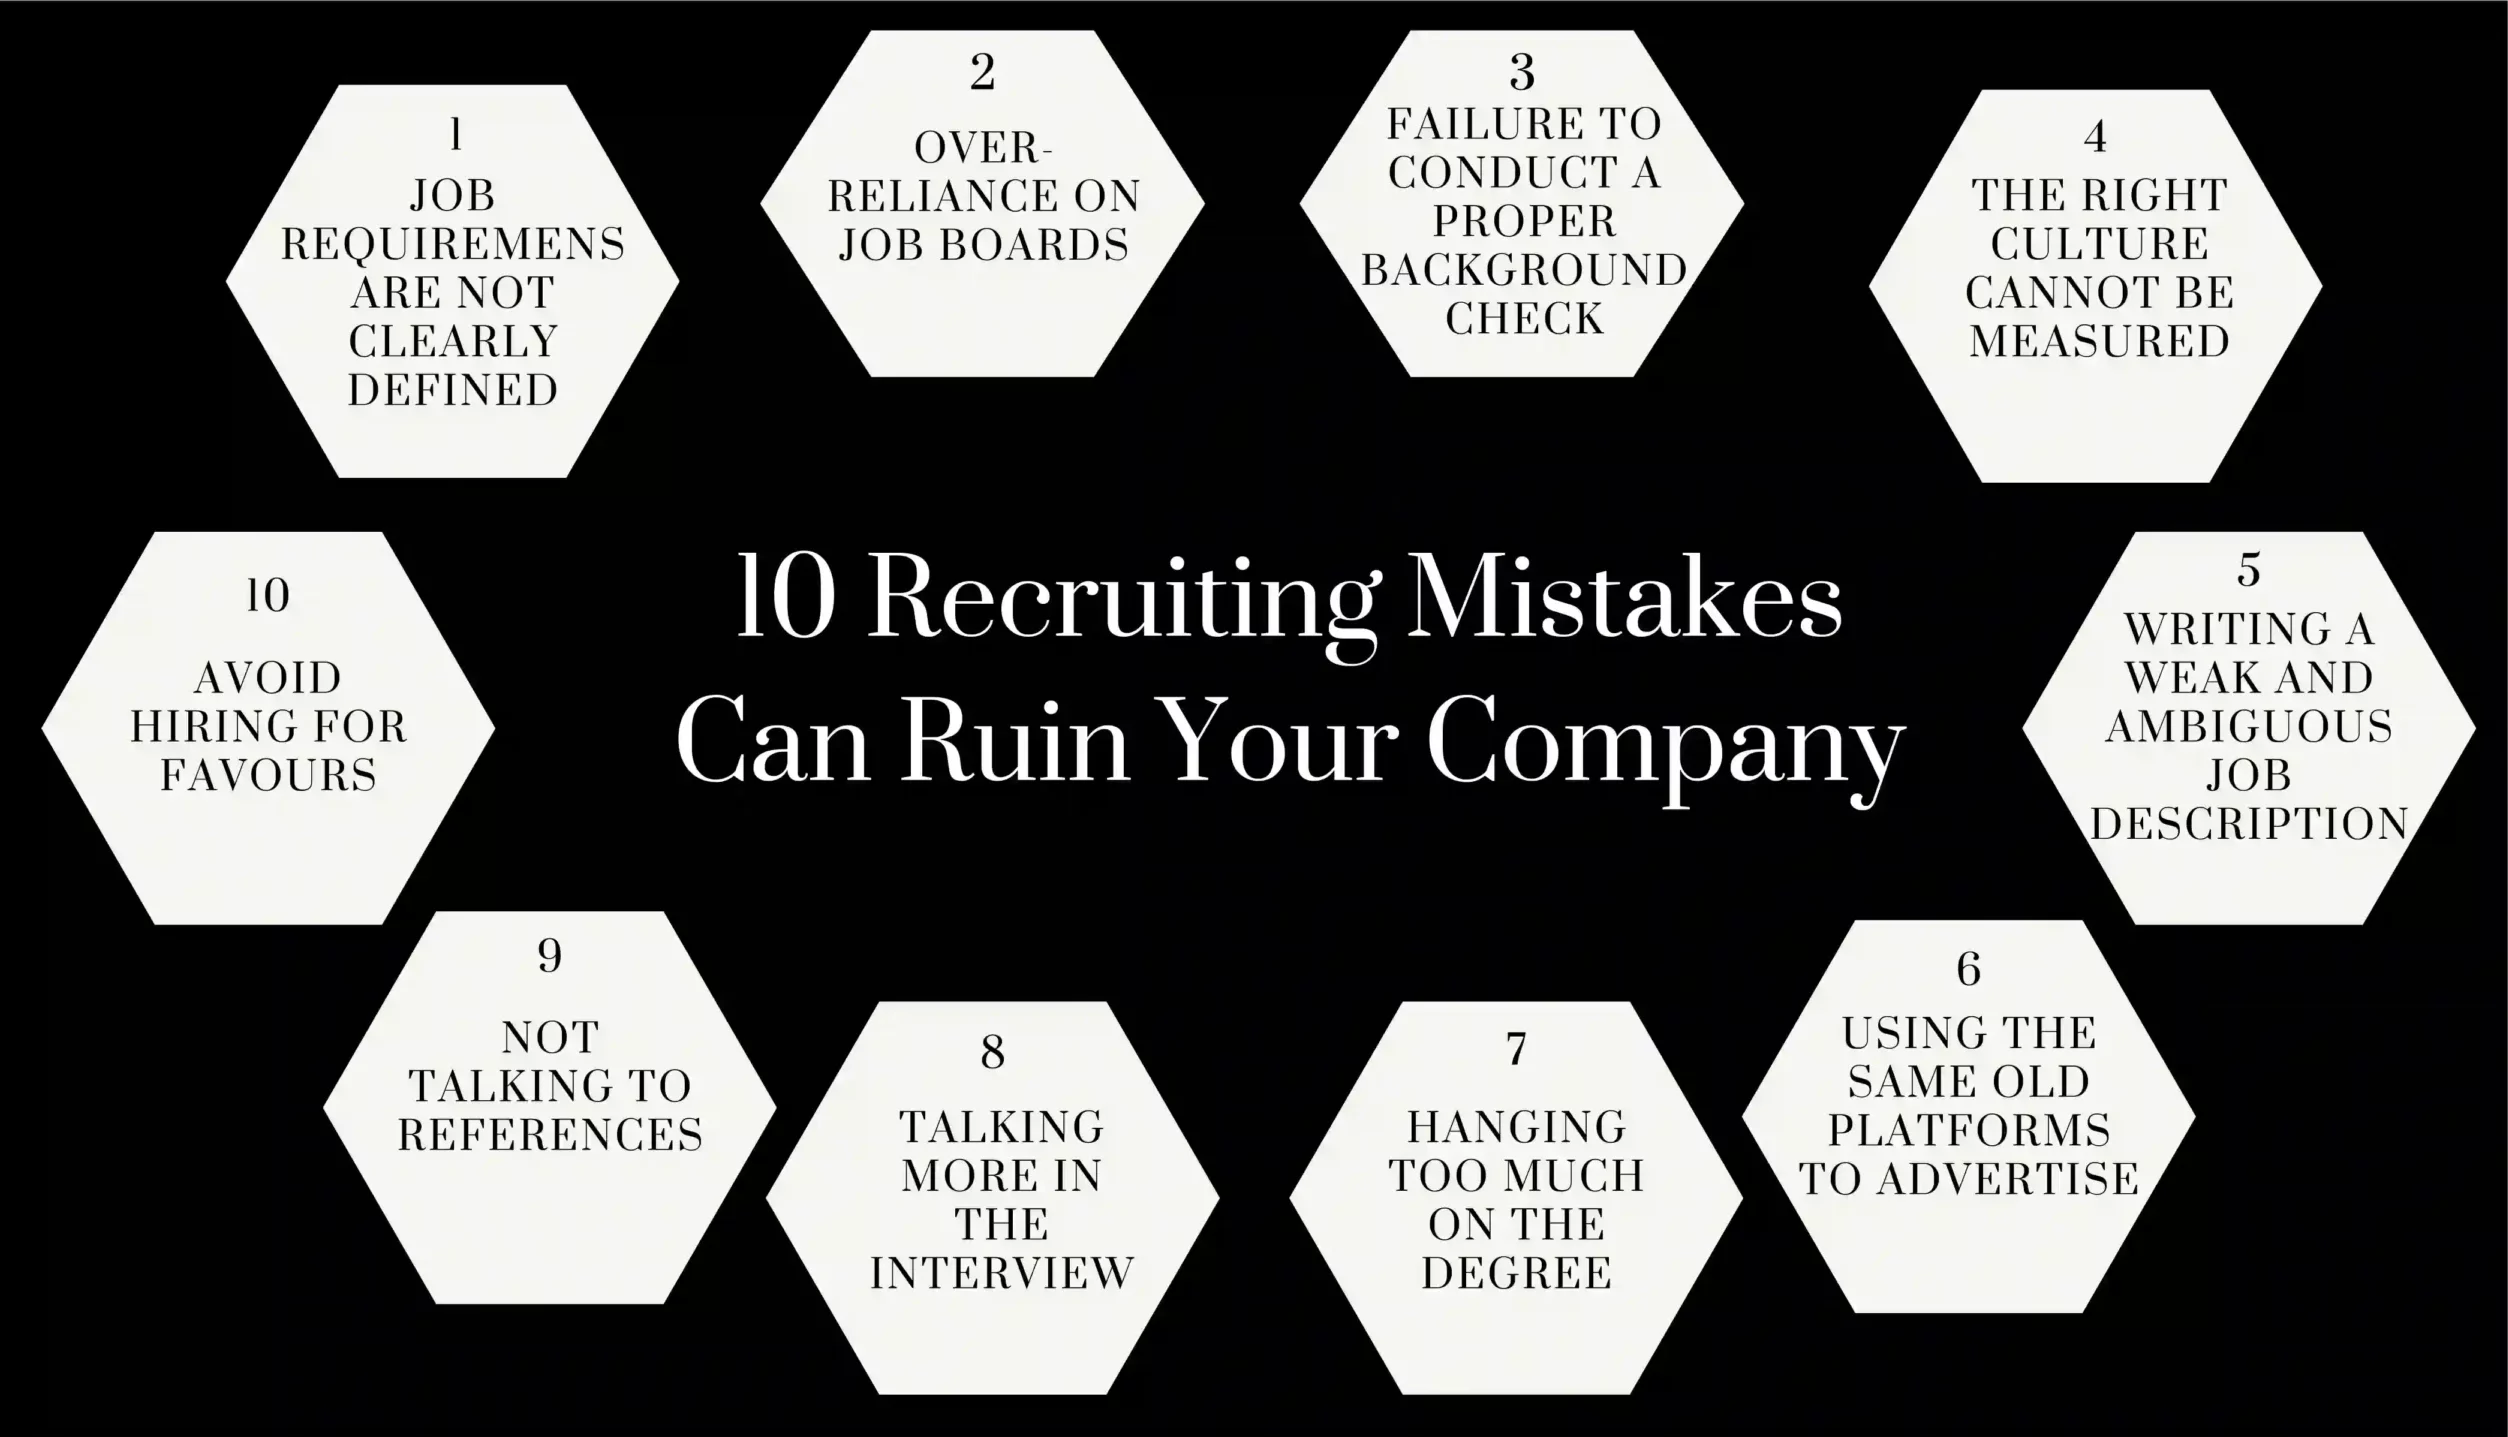 10 Recruiting Mistakes Can Ruin Your Company